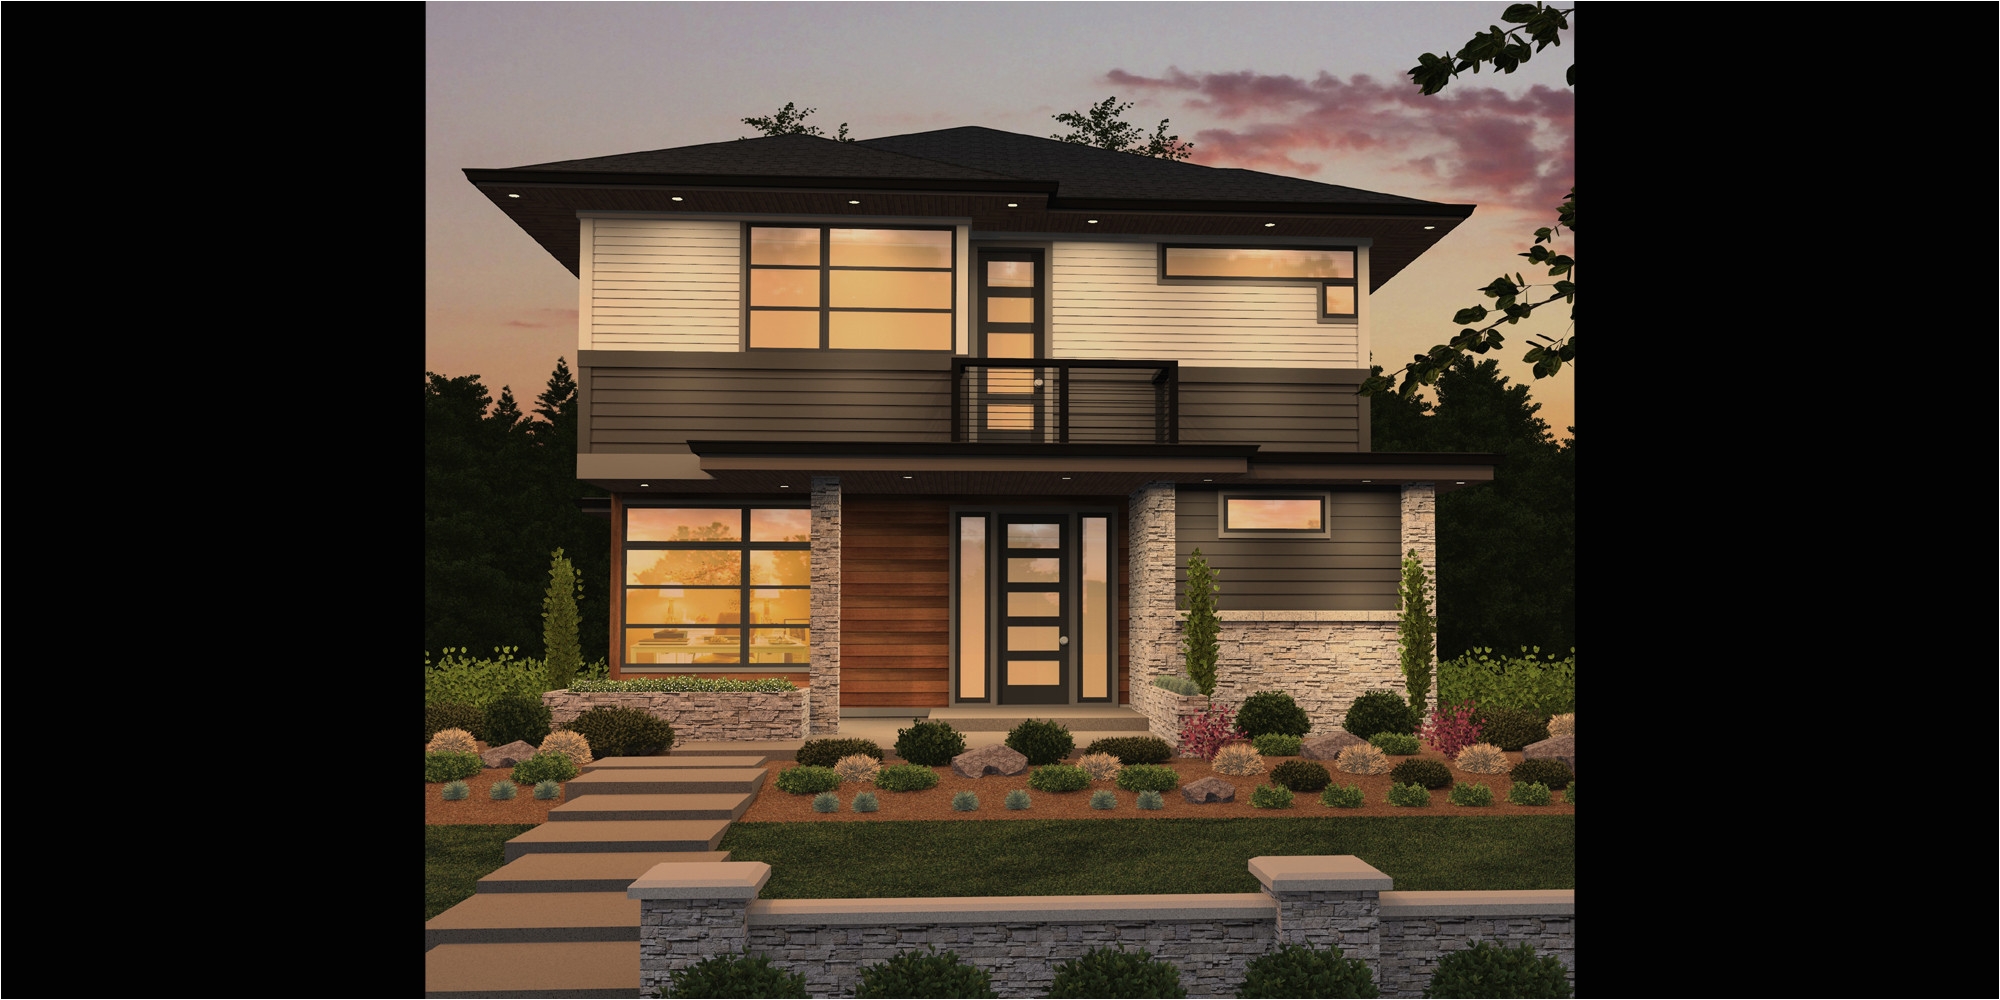 house plans vancouver wa luxury modern house plans home designs shop floor plans with